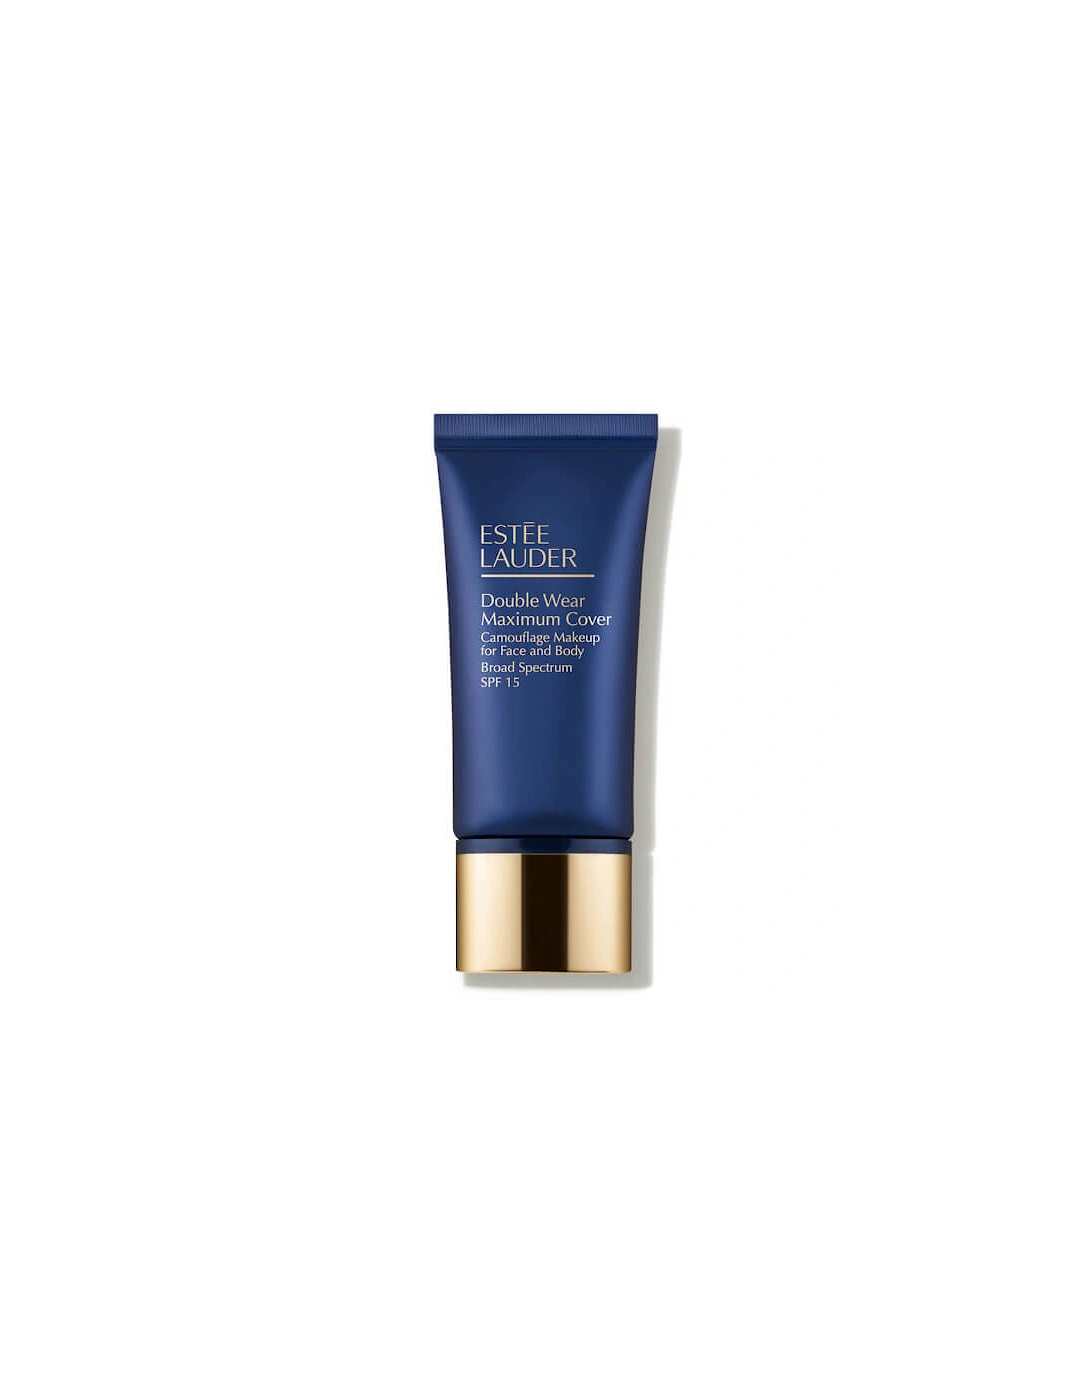 Estée Lauder Double Wear Maximum Cover Camouflage Makeup for Face and Body SPF15 in Medium Deep, 2 of 1